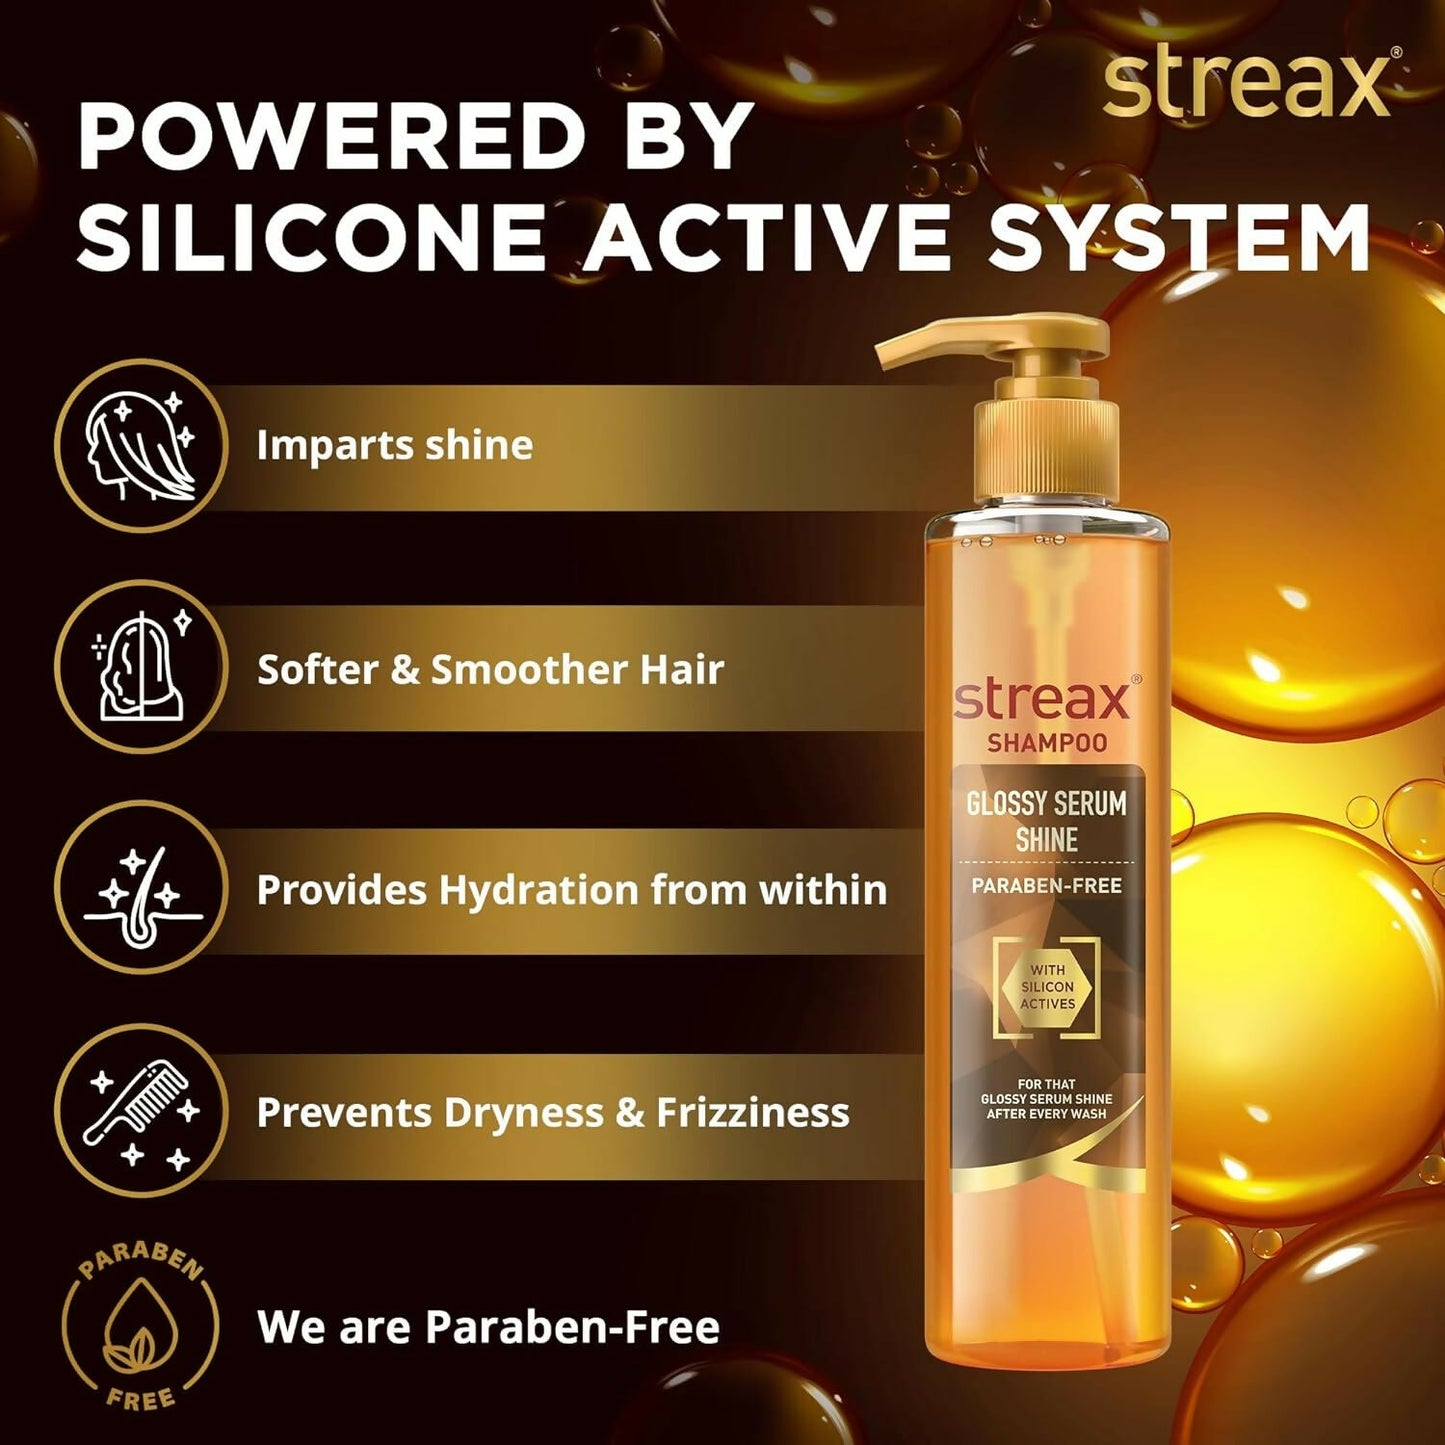 Streax Glossy Serum Shine Shampoo with Silicon Actives For Frizzy and Dry Hair